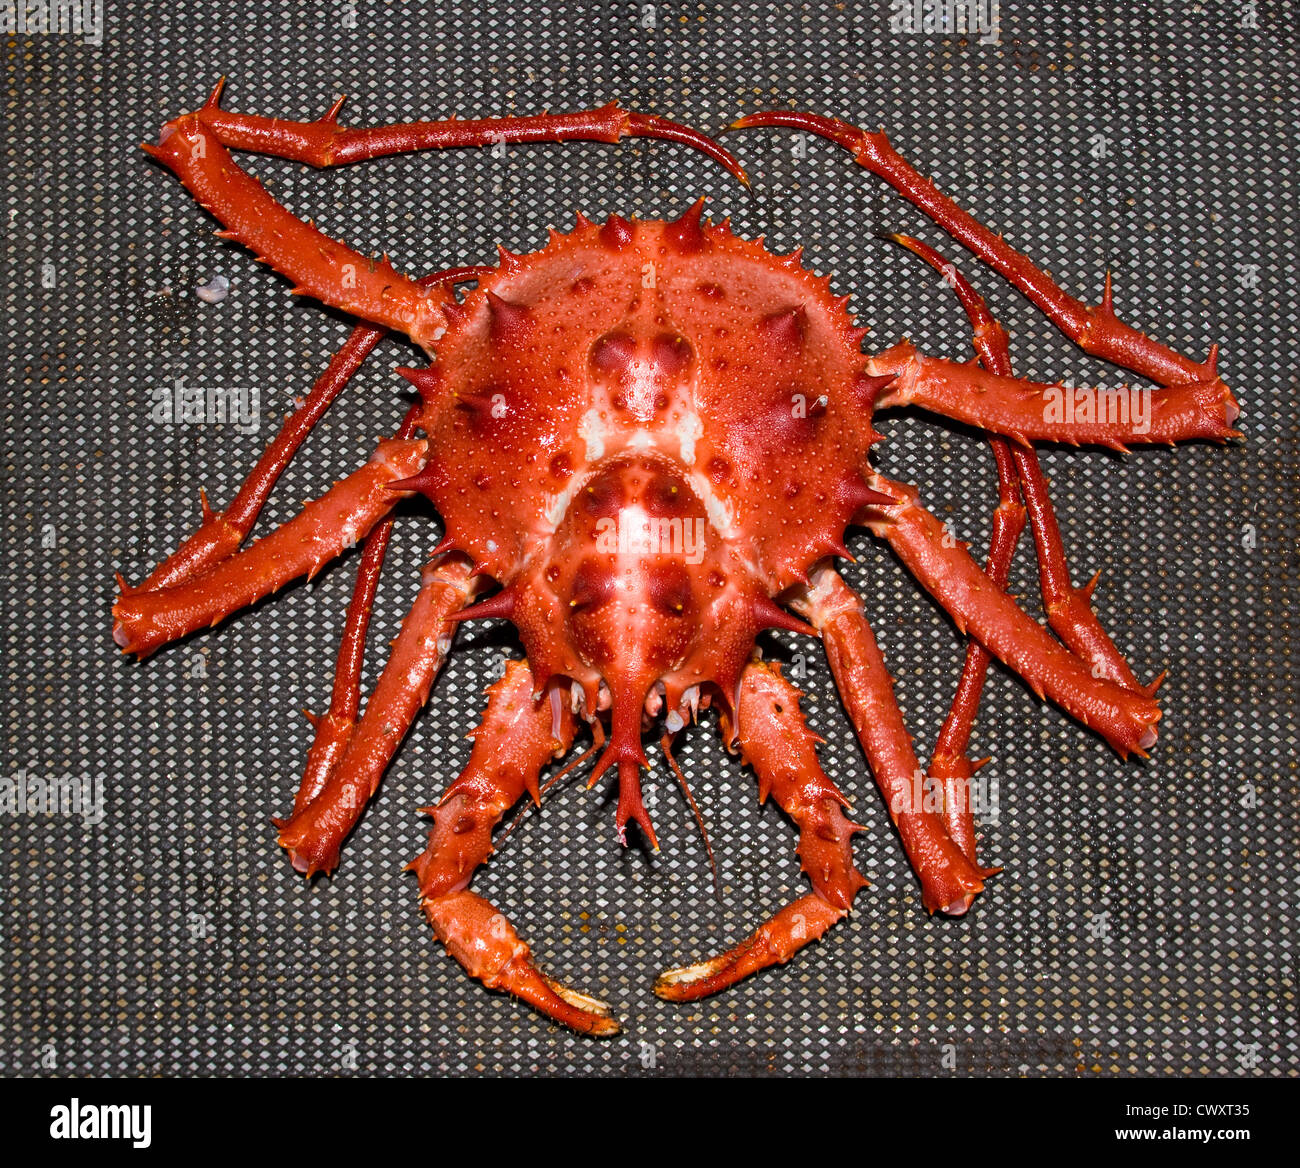 King Crab.  By-catch in a haul from trawl net on a commercial fishing trawler. Murray's King Crab (Lithodes Murrayi). Stock Photo